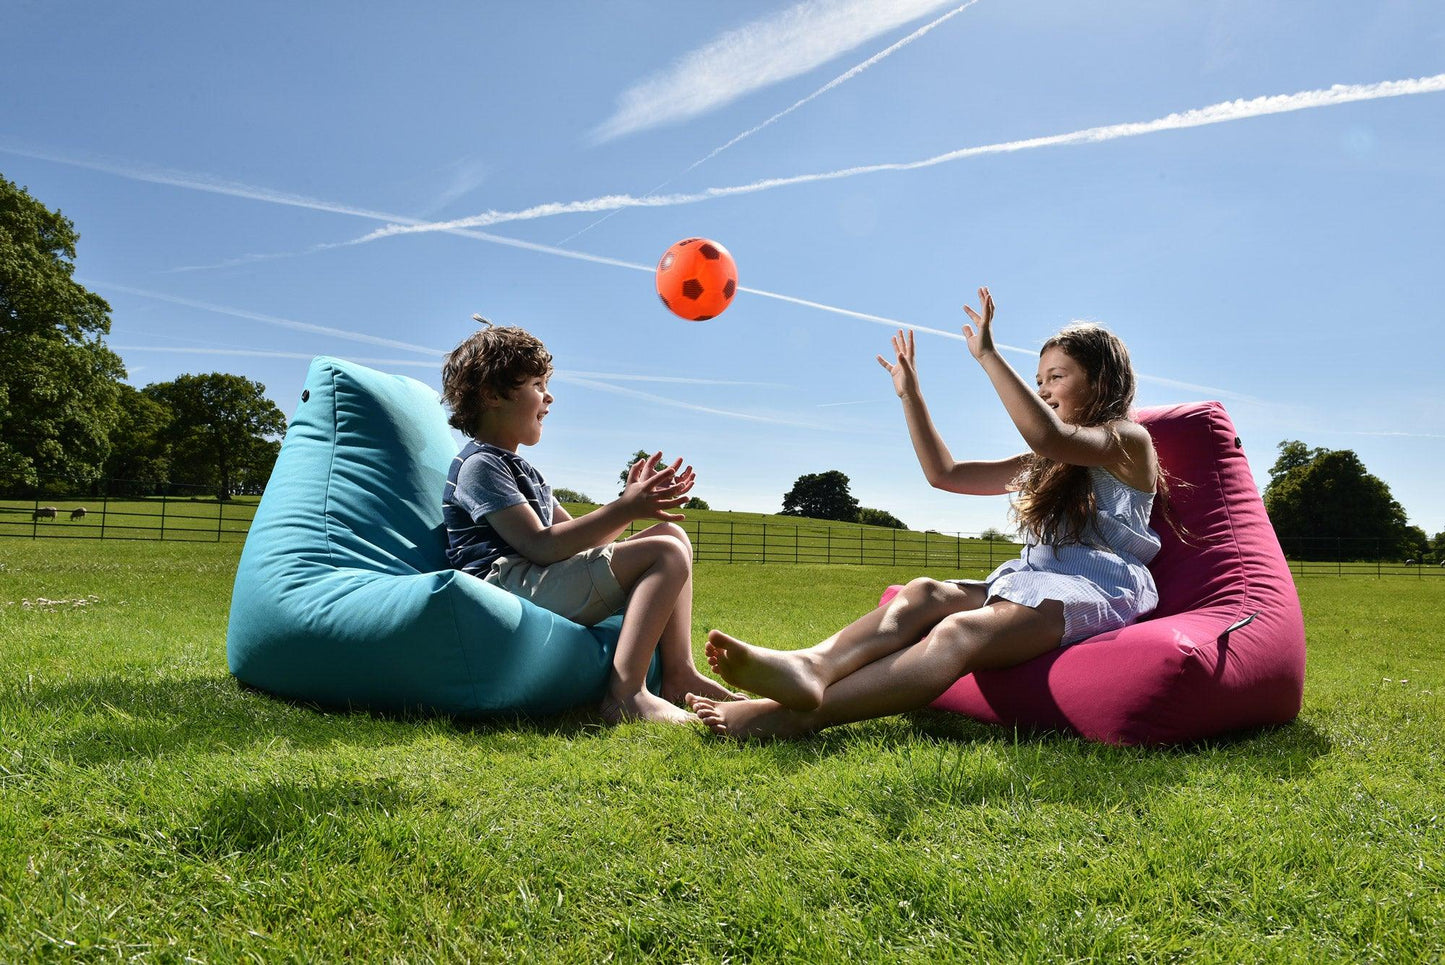 Two children are playing with an orange ball on a sunny day. They are sitting on colorful Brisks Extreme Lounging Outdoor Mini B-Bags on a grassy field. The boy is on a blue one and the girl is on a pink one. Trees and a clear blue sky with contrails can be seen in the background, ensuring durable and comfortable fun.